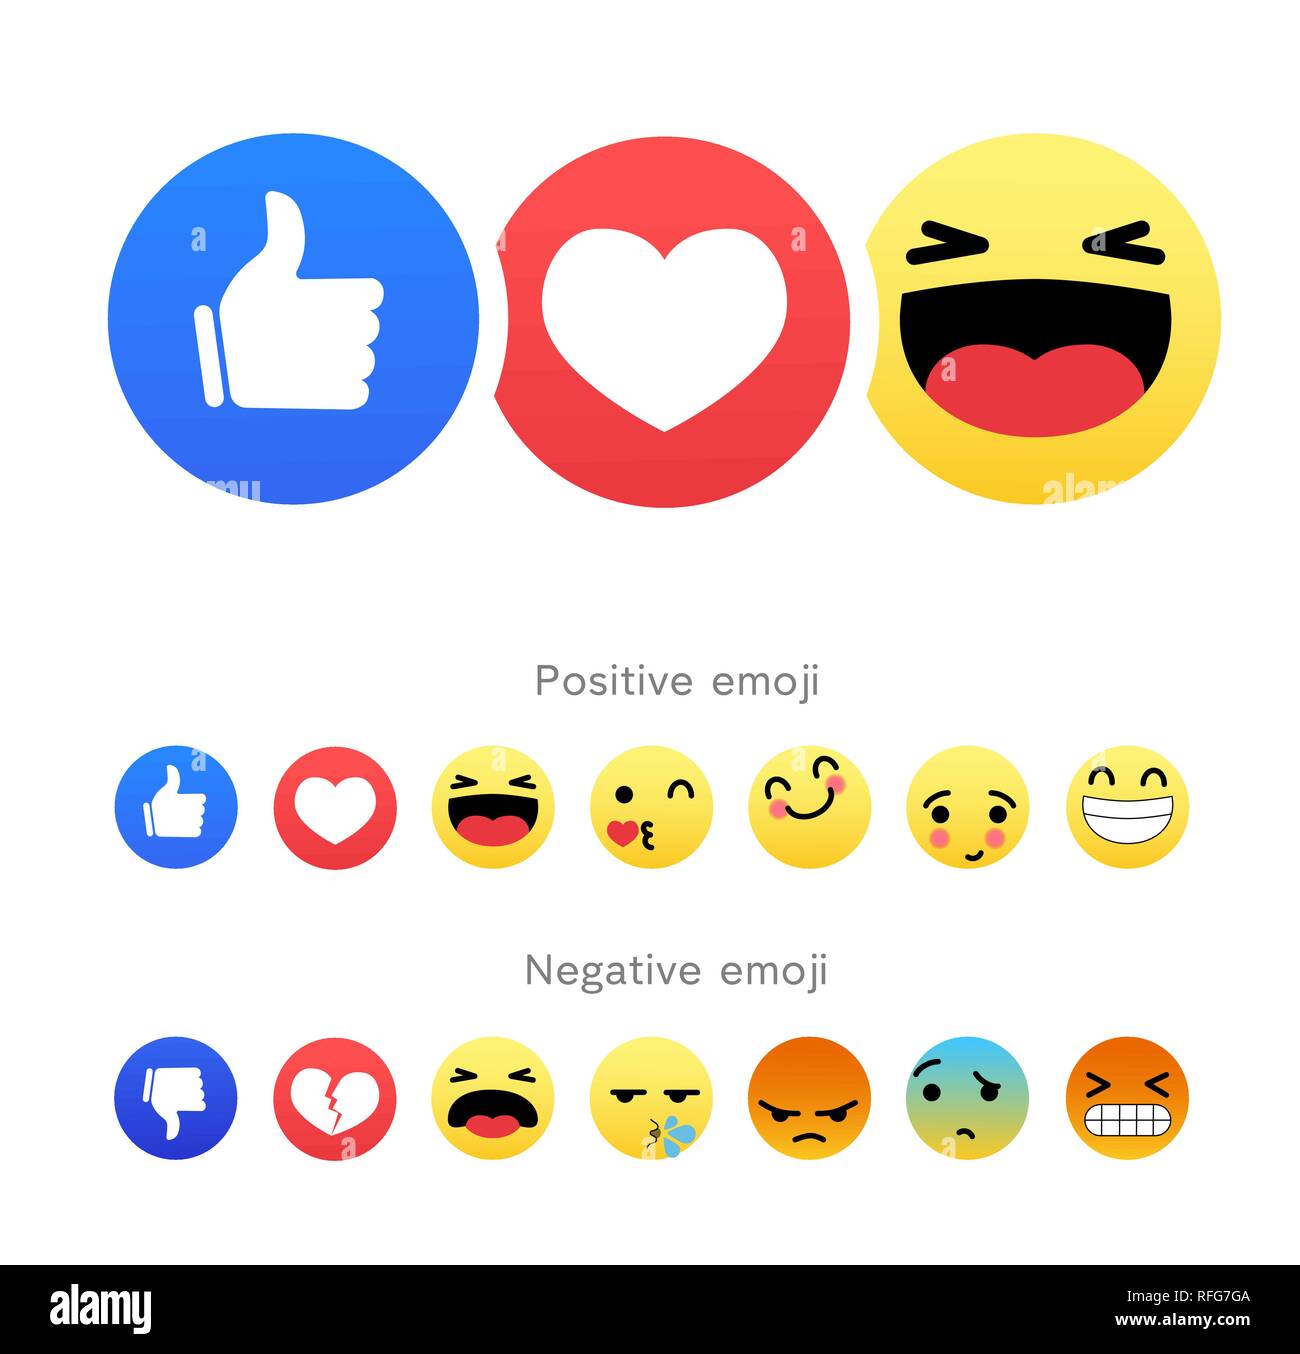 Set of positive and negative round emoji icons Stock Vector